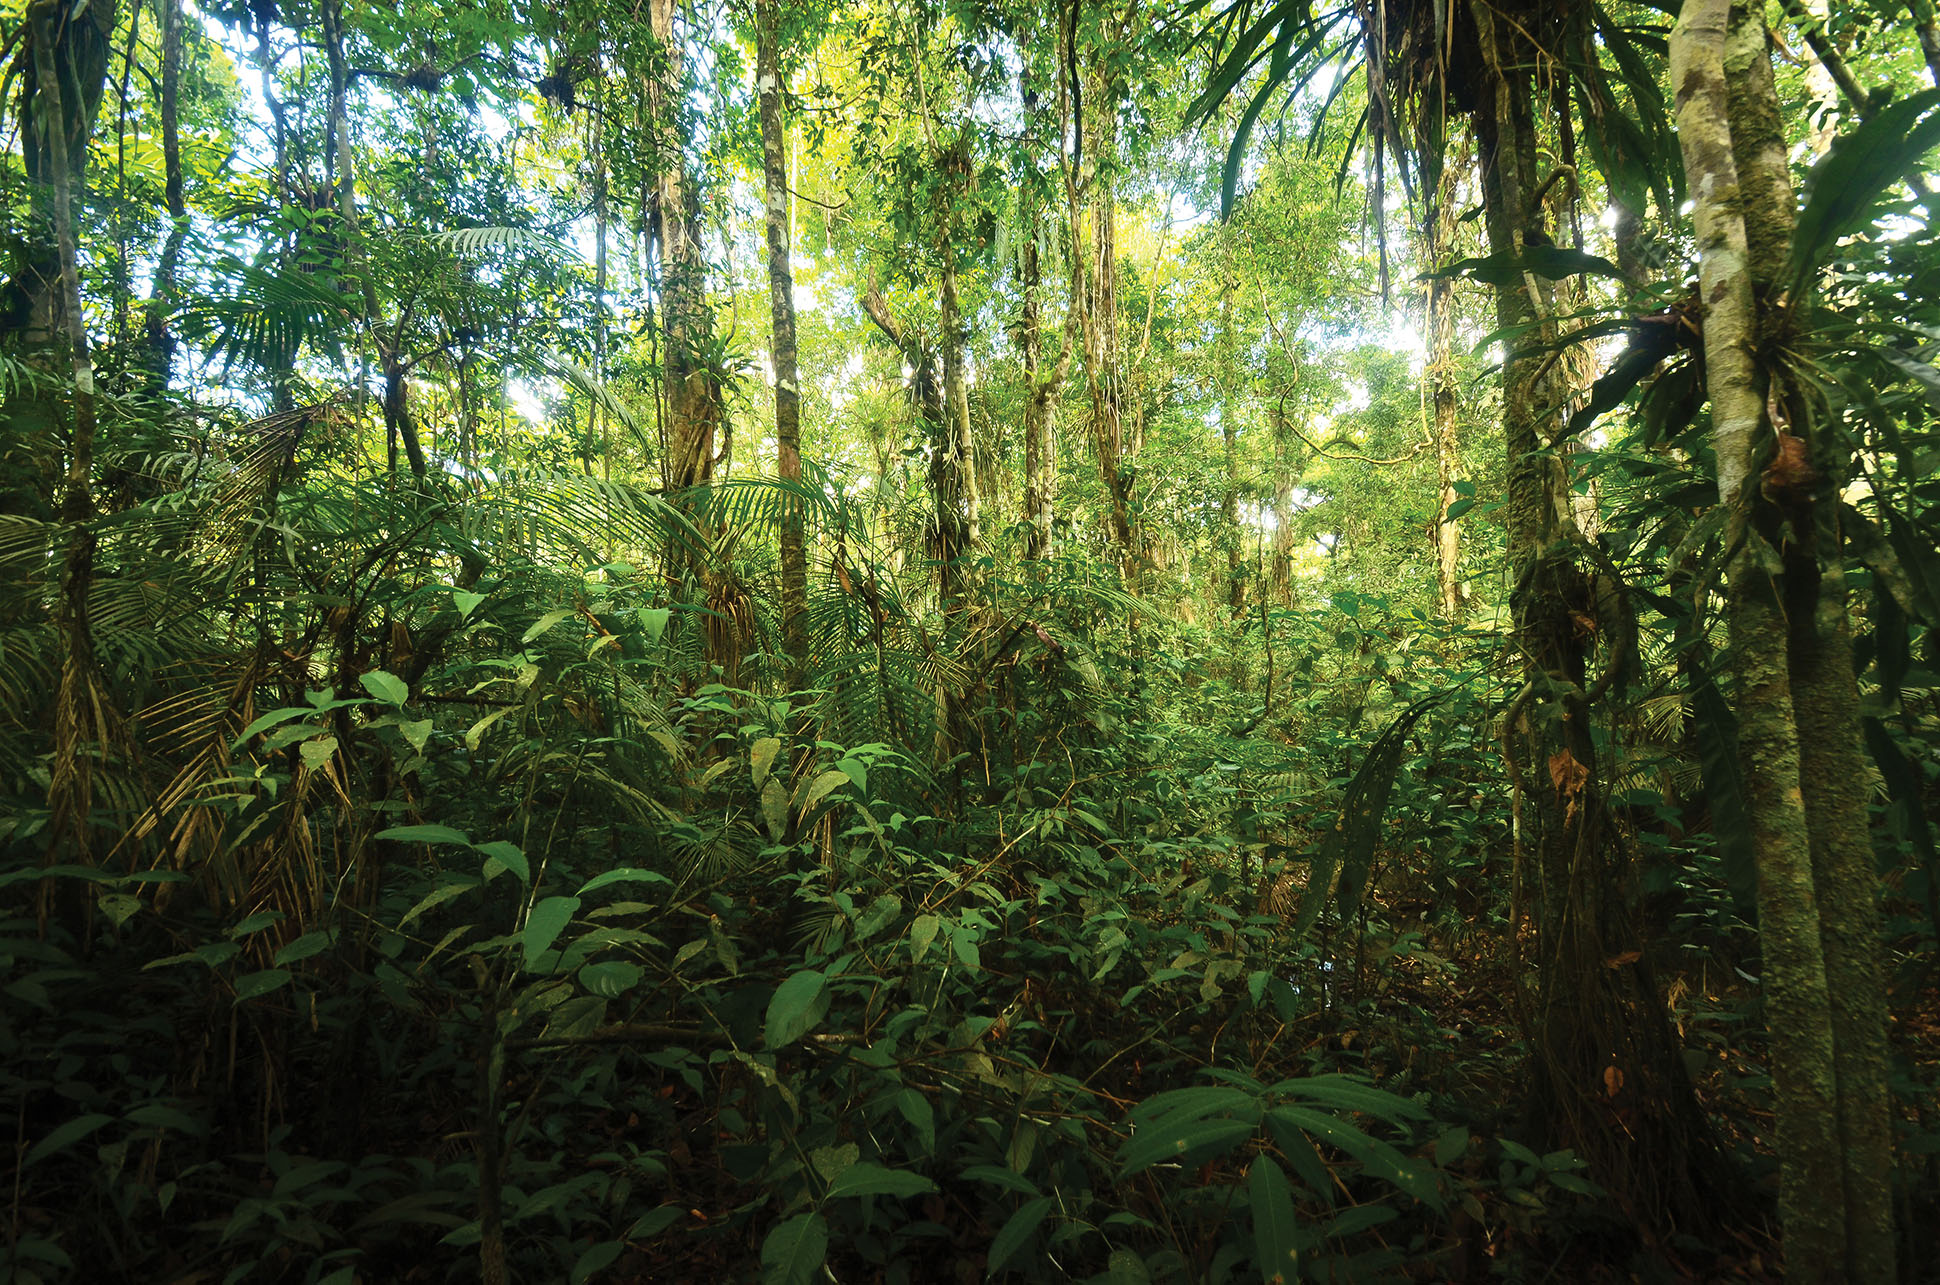 Lush foliage and trees in the Amazonian rainforest. (Photo by Alberto García.)